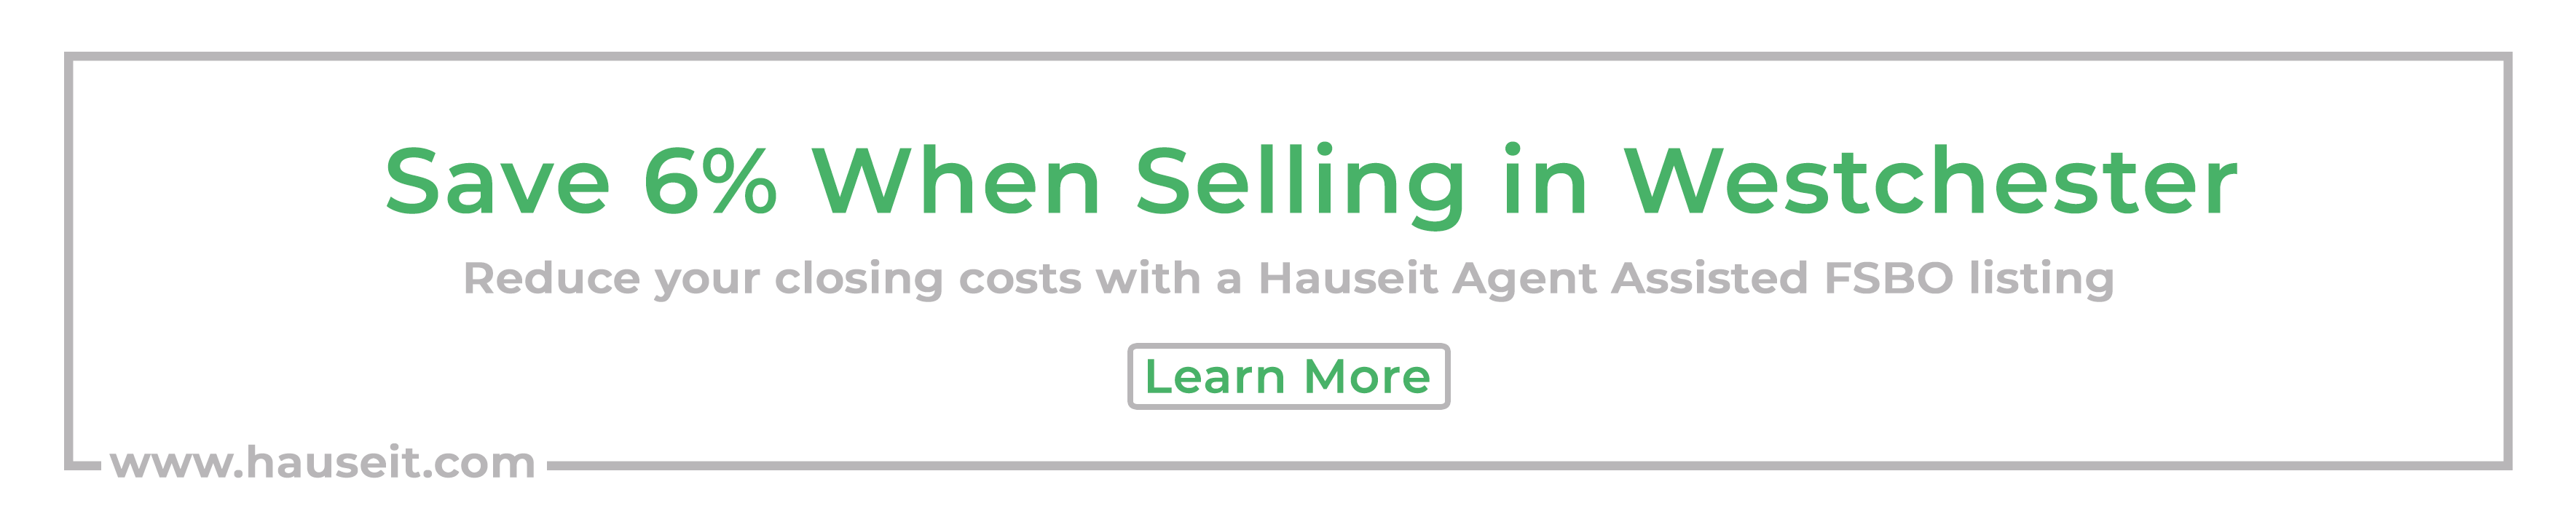 westchester-transfer-tax-calculator-for-sellers-hauseit